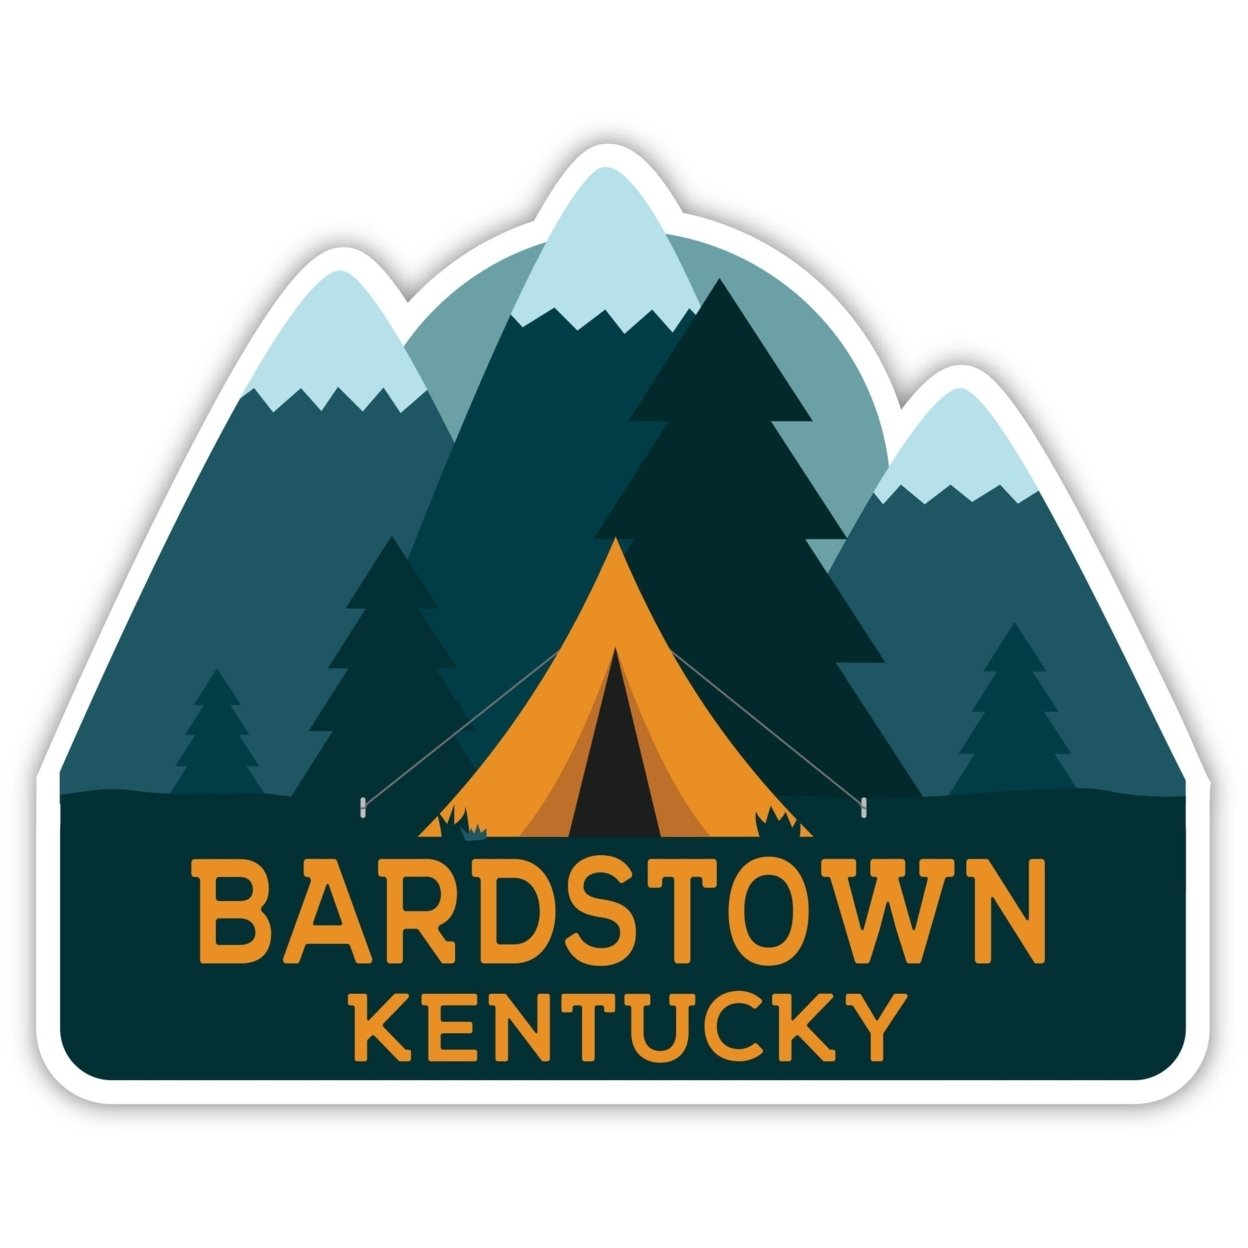 Bardstown Kentucky Souvenir Decorative Stickers (Choose Theme And Size) - 4-Pack, 8-Inch, Tent